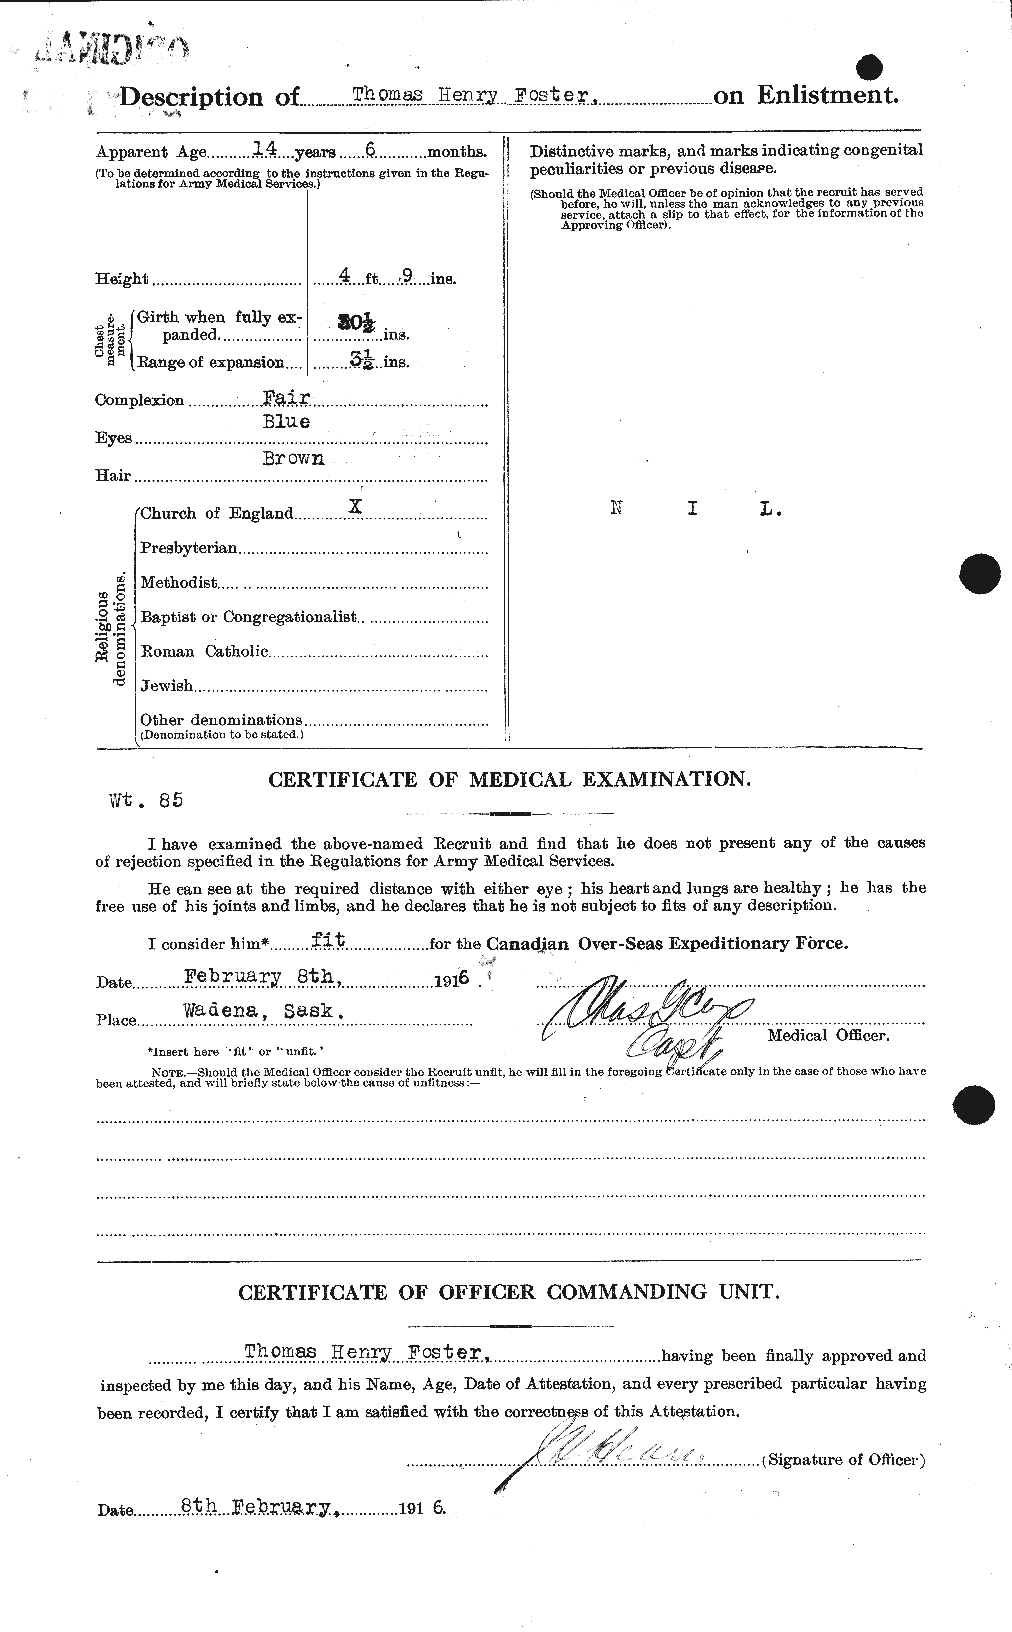 Personnel Records of the First World War - CEF 335237b